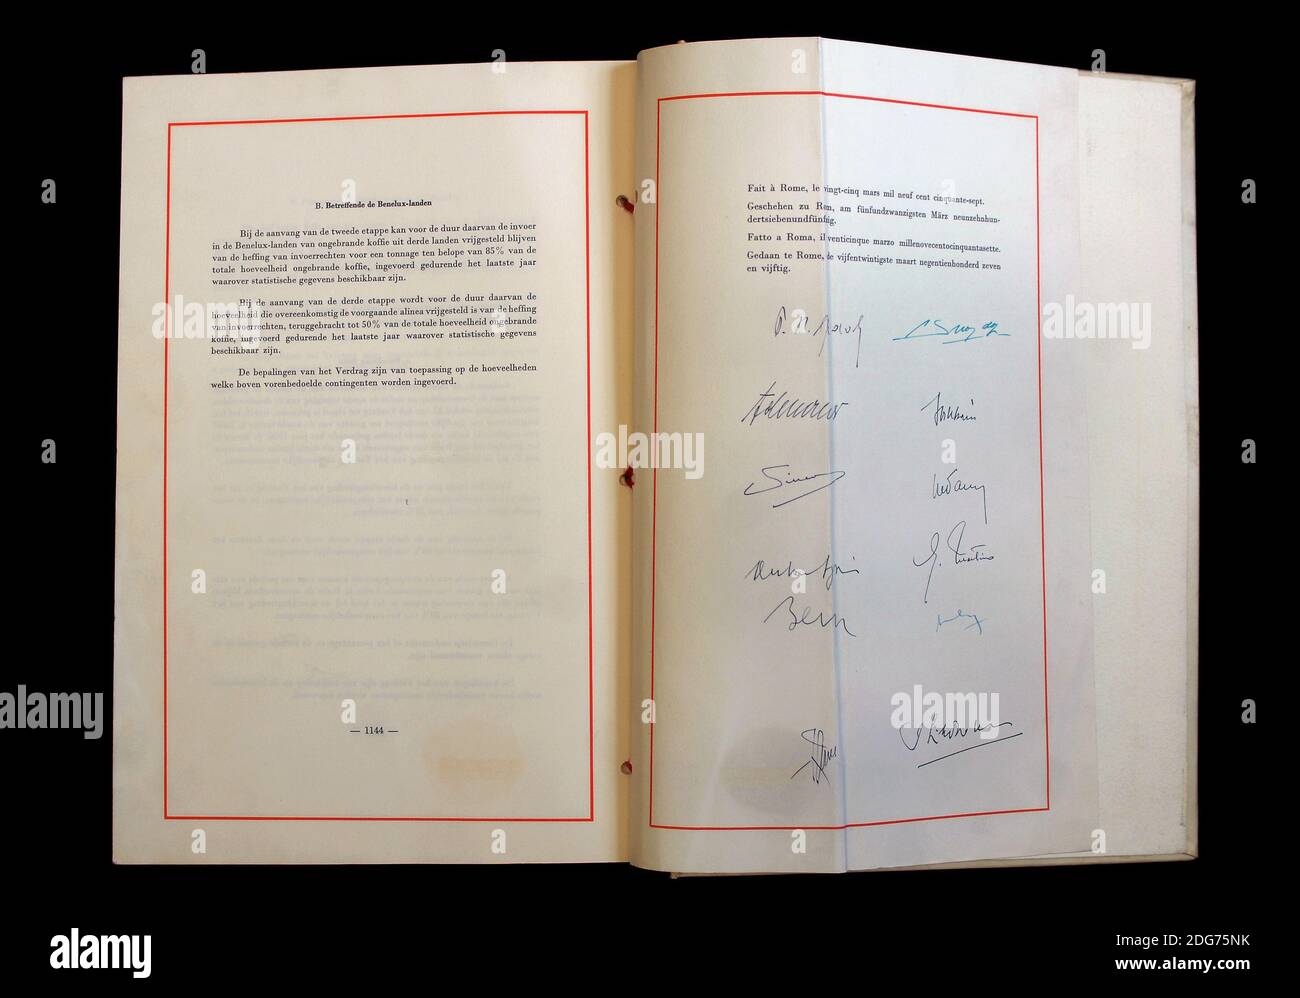 The original Treaty of Rome establishing the European Economic Community is kept in the archives of the Farnesina palace, the italian Ministry of Foreign Affairs in Rome, Italy. 60 years ago, on 25th March 1957 during a solemn ceremony in the 'Orazi e Curiazi hall' of Palazzo dei Conservatori in Campidoglio in Rome, six countries: Germany, France, Italy, Luxembourg, Netherlands and Belgium signed the Treaty of Rome creating the European Economic Community (EEC). The Treaty was signed by the following: Paul-Henri Spaak and J.Ch Snoy et d'Oppuers (Belgium), Konrad Adenauer and Walter Hallstein ( Stock Photo